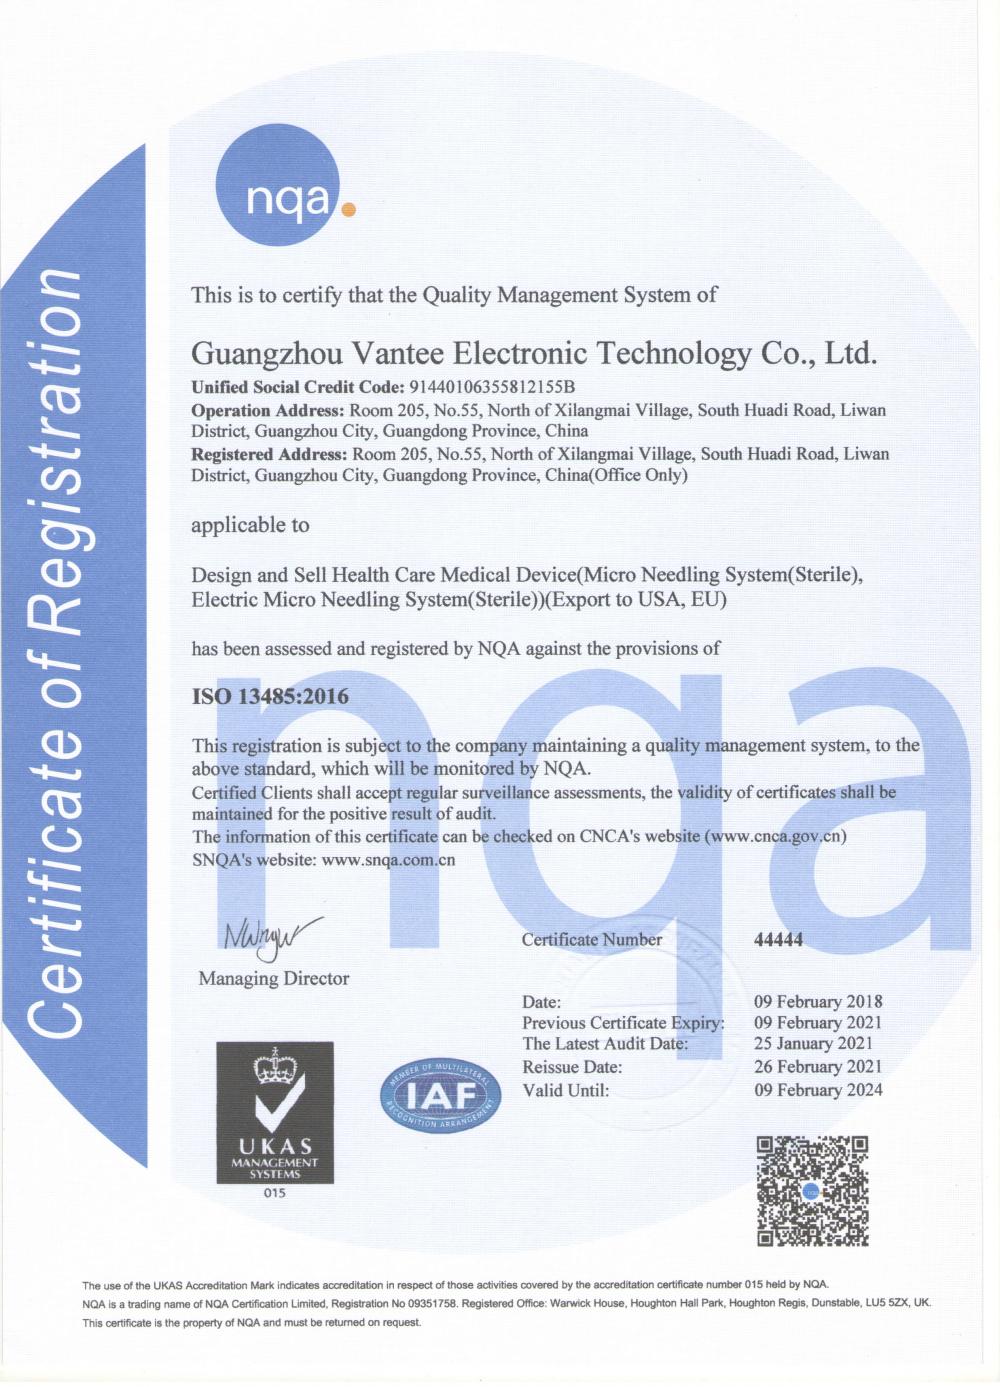 ISO13485 for Micro Needling System and Electric Micro Needling System